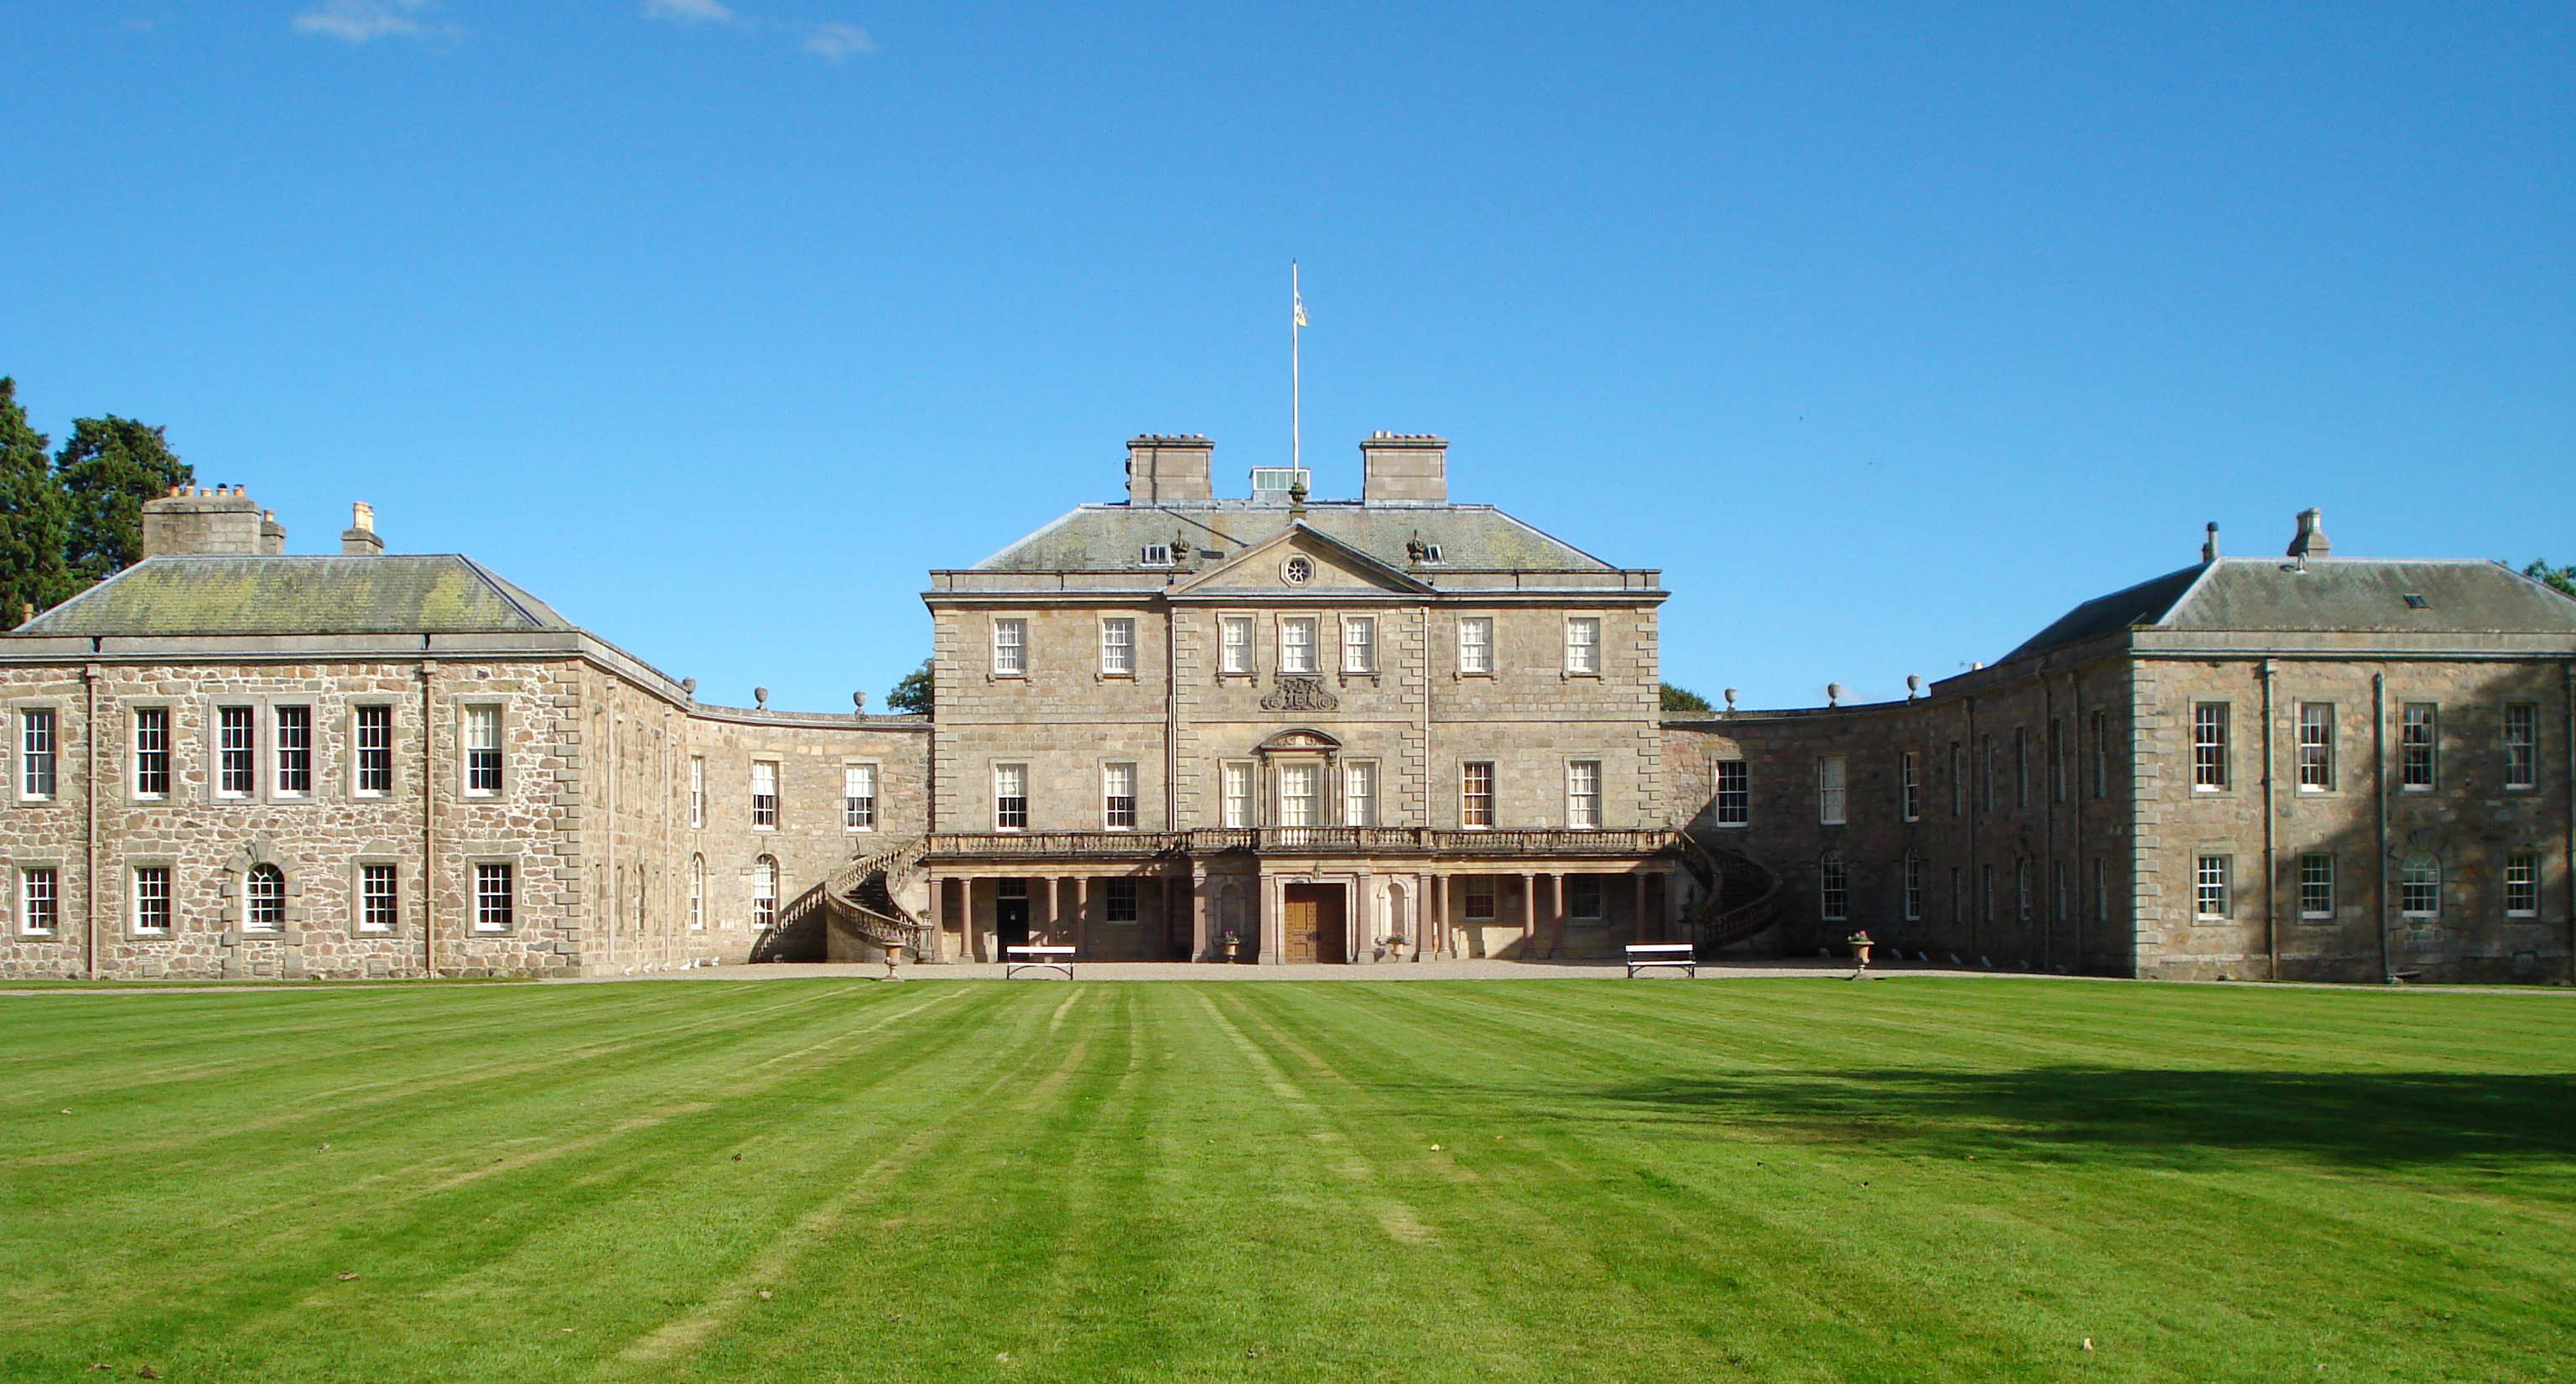 Haddo House is expected to remain closed until 2021.